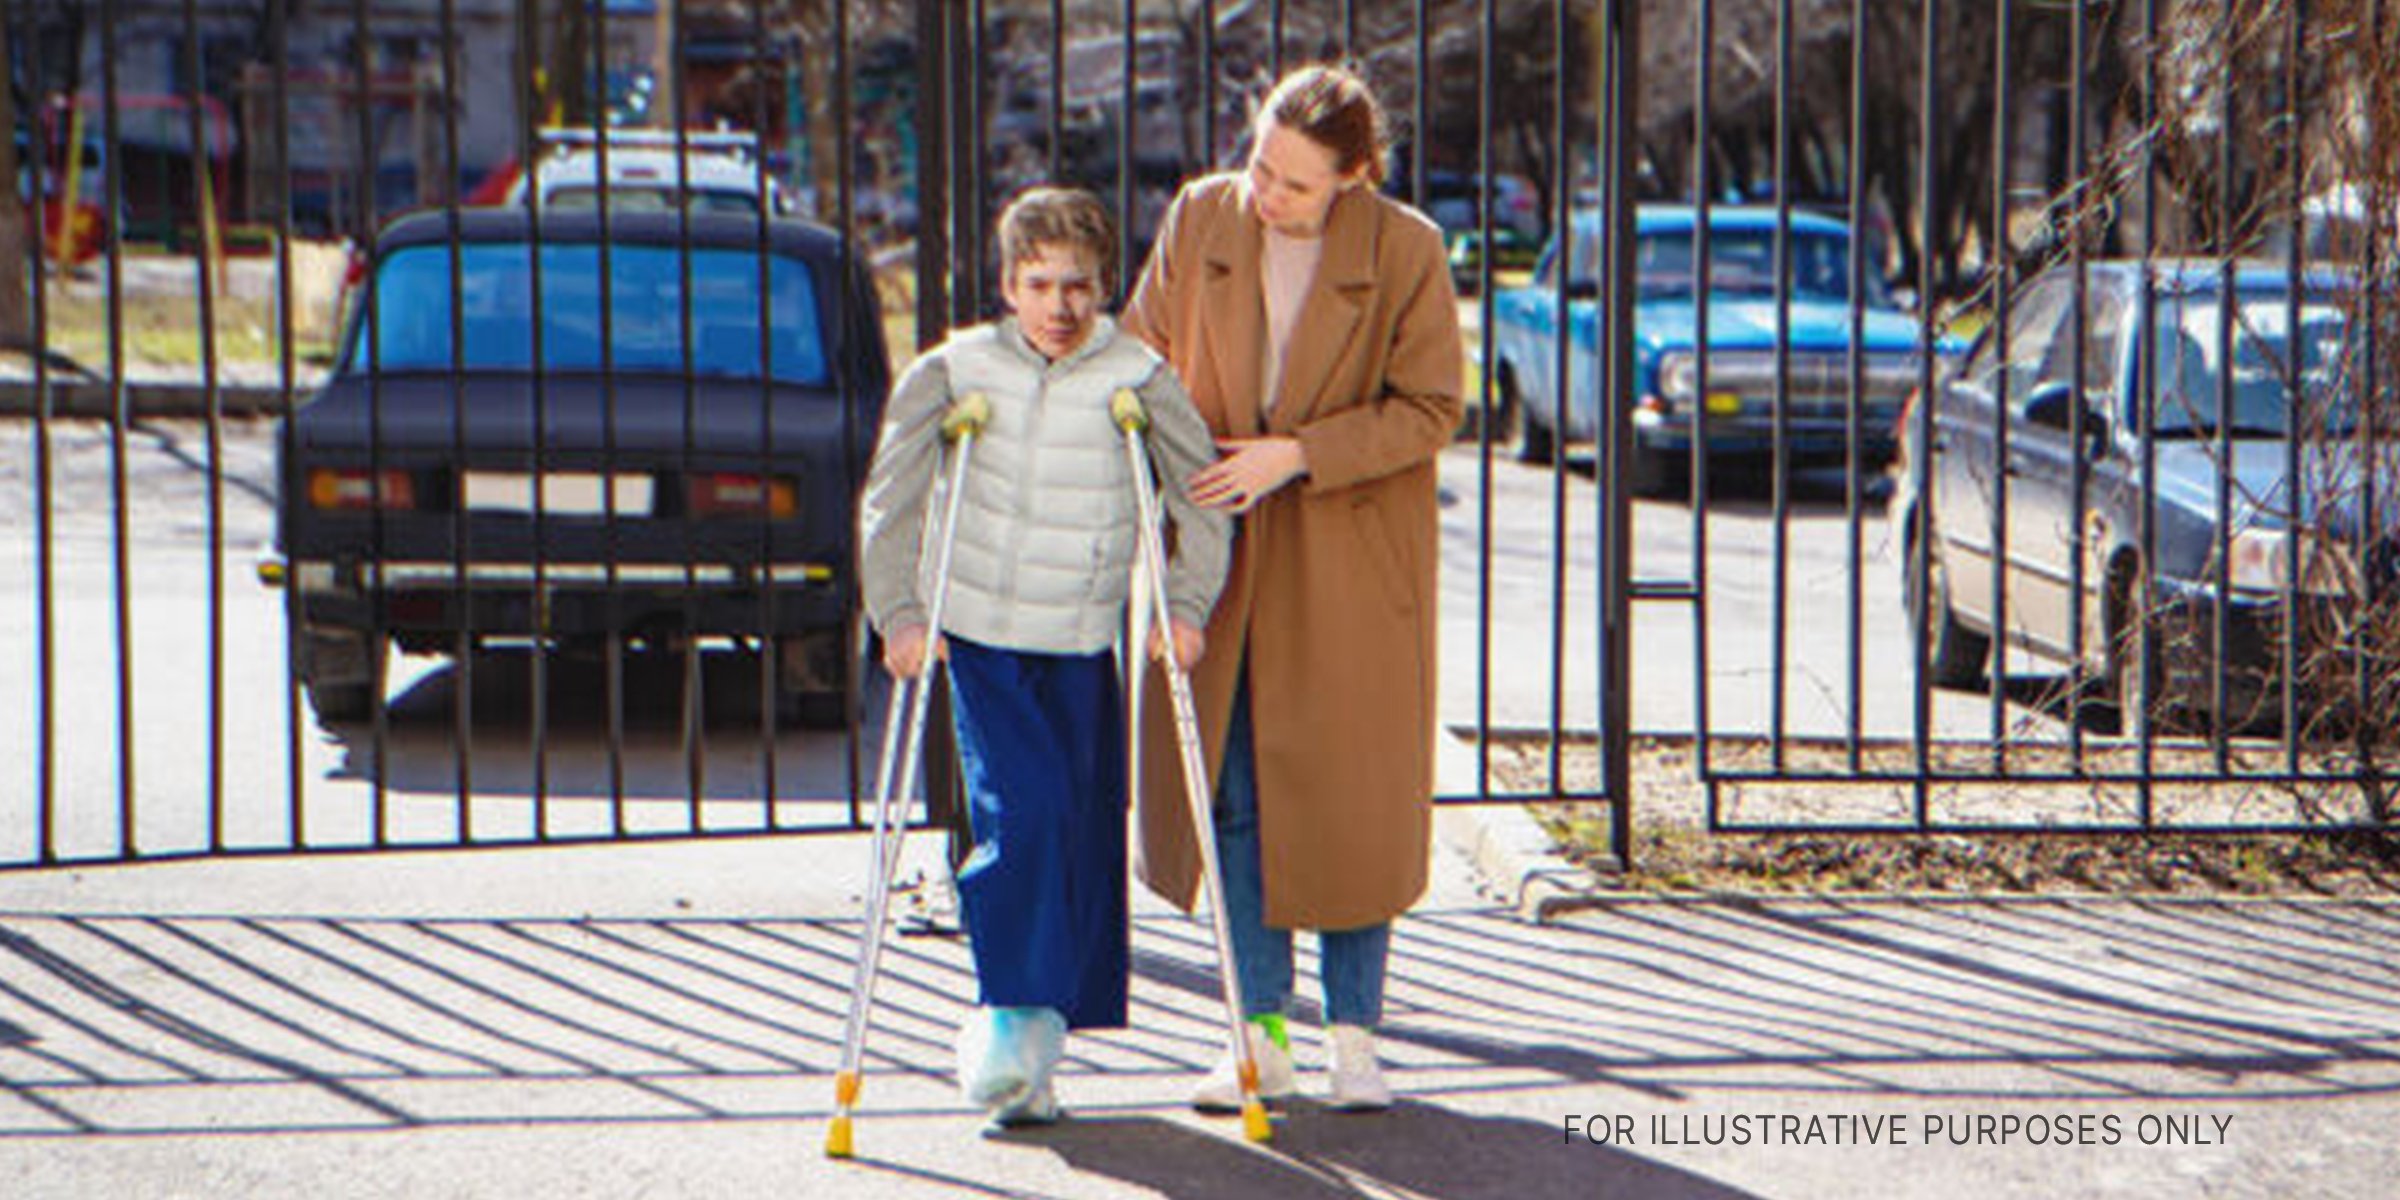 Woman helping boy on crutches. | Source: Getty Images 